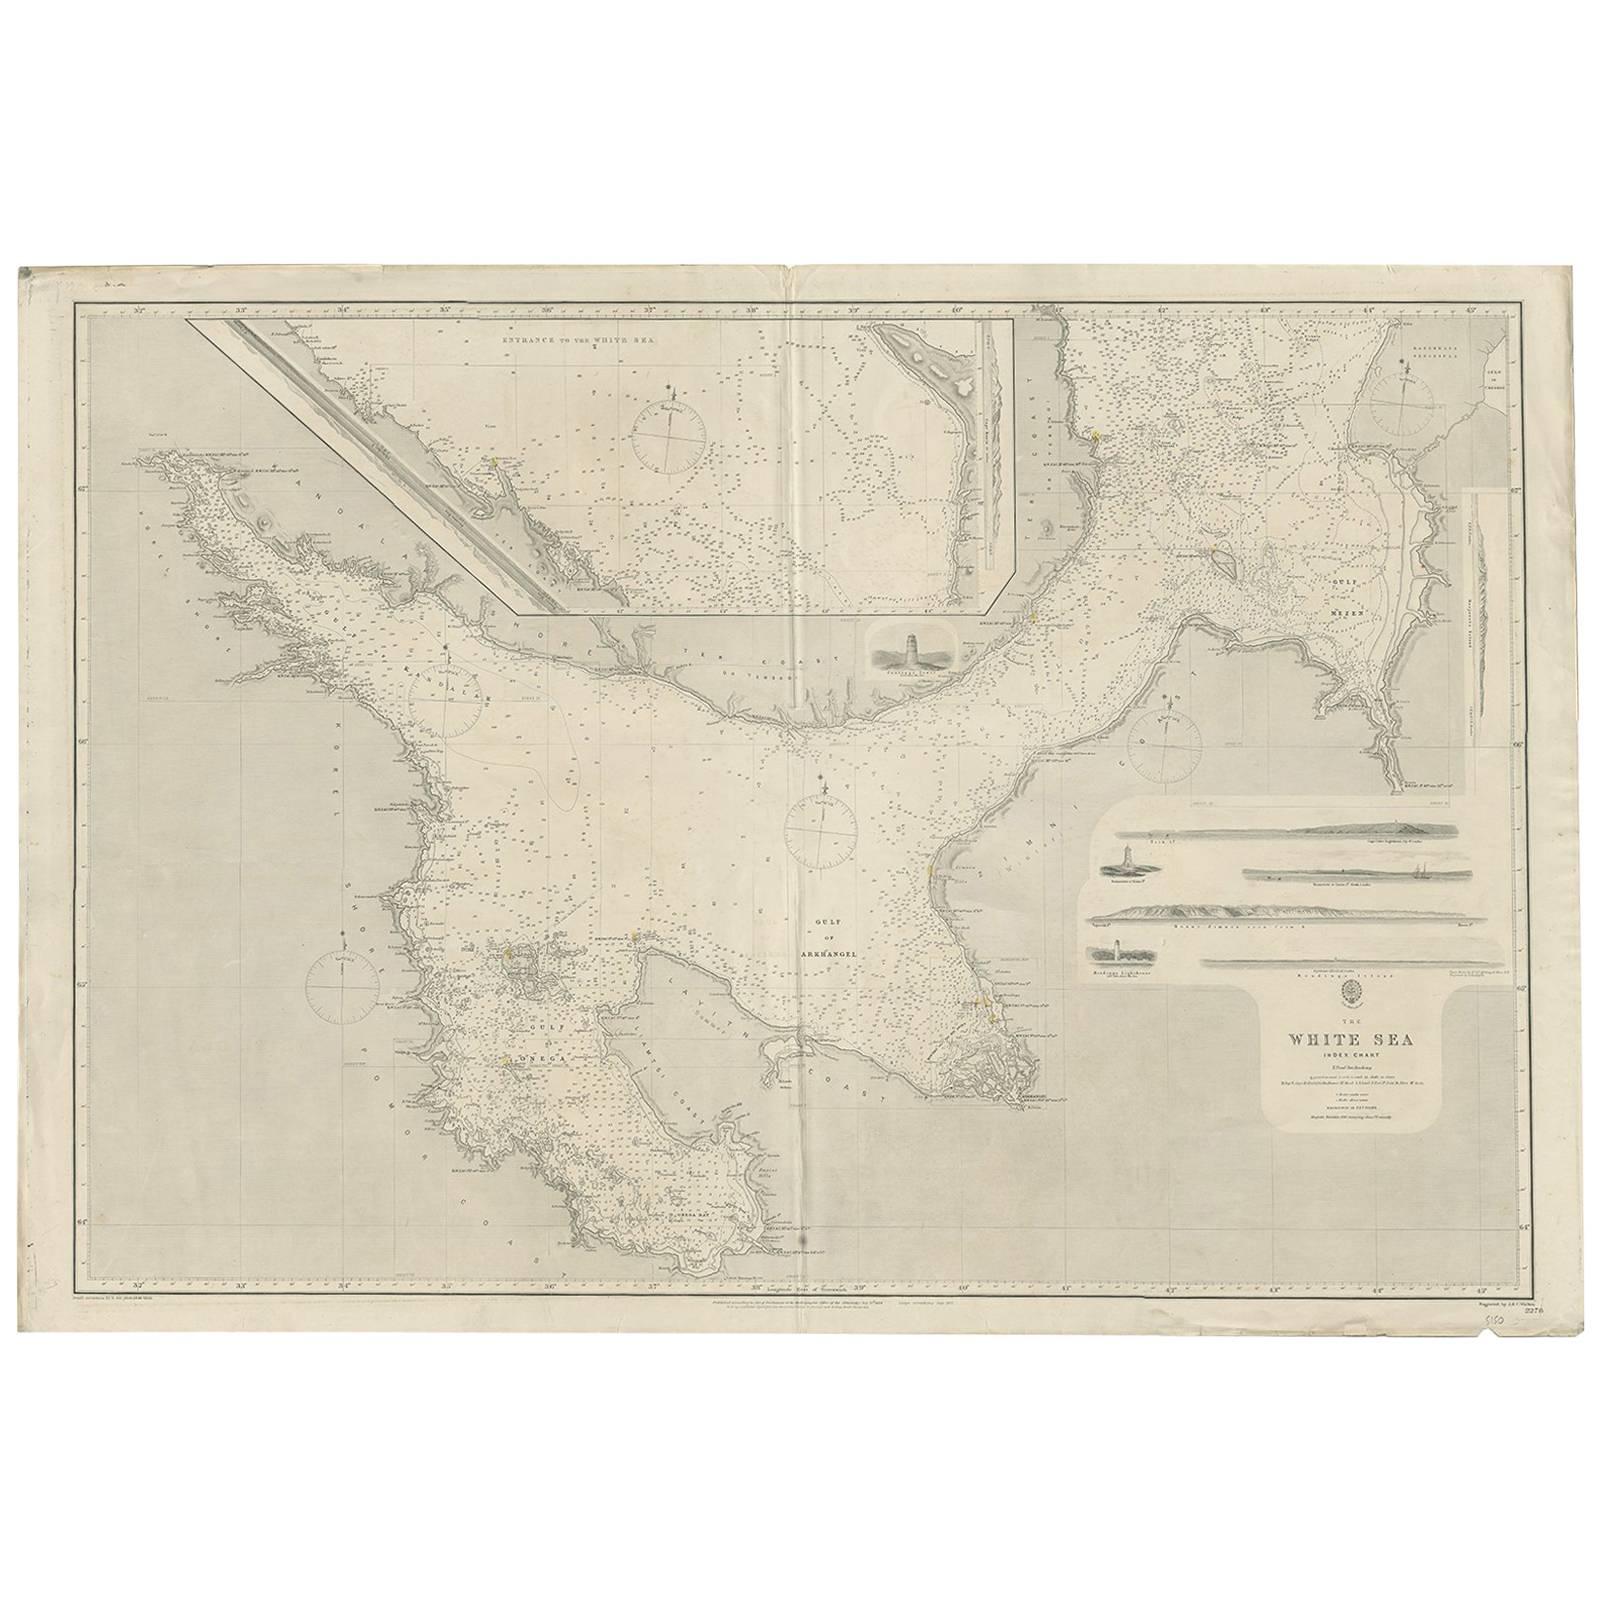 Antique Map of the White Sea 'Russia' by J. & C. Walker, 1885